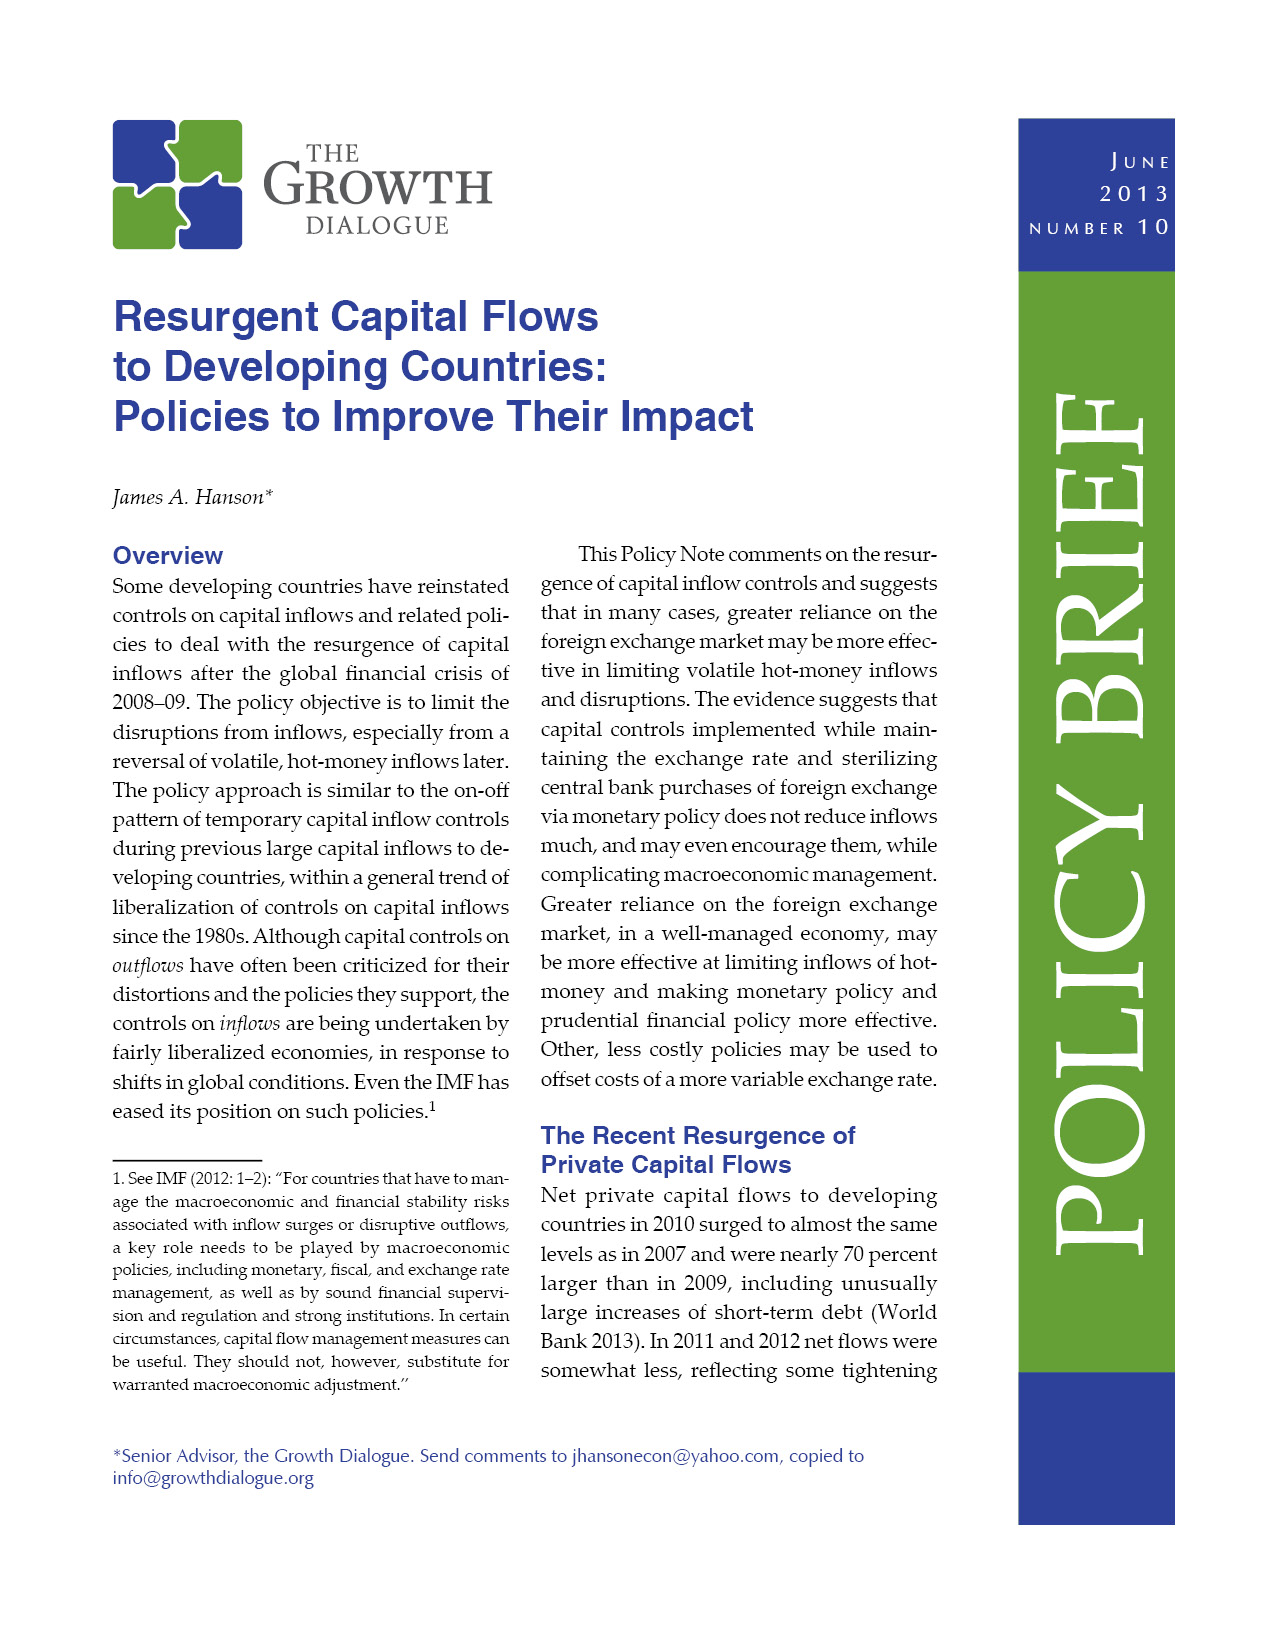 Resurgent Capital Flows to Developing Countries: Policies to Improve Their Impact